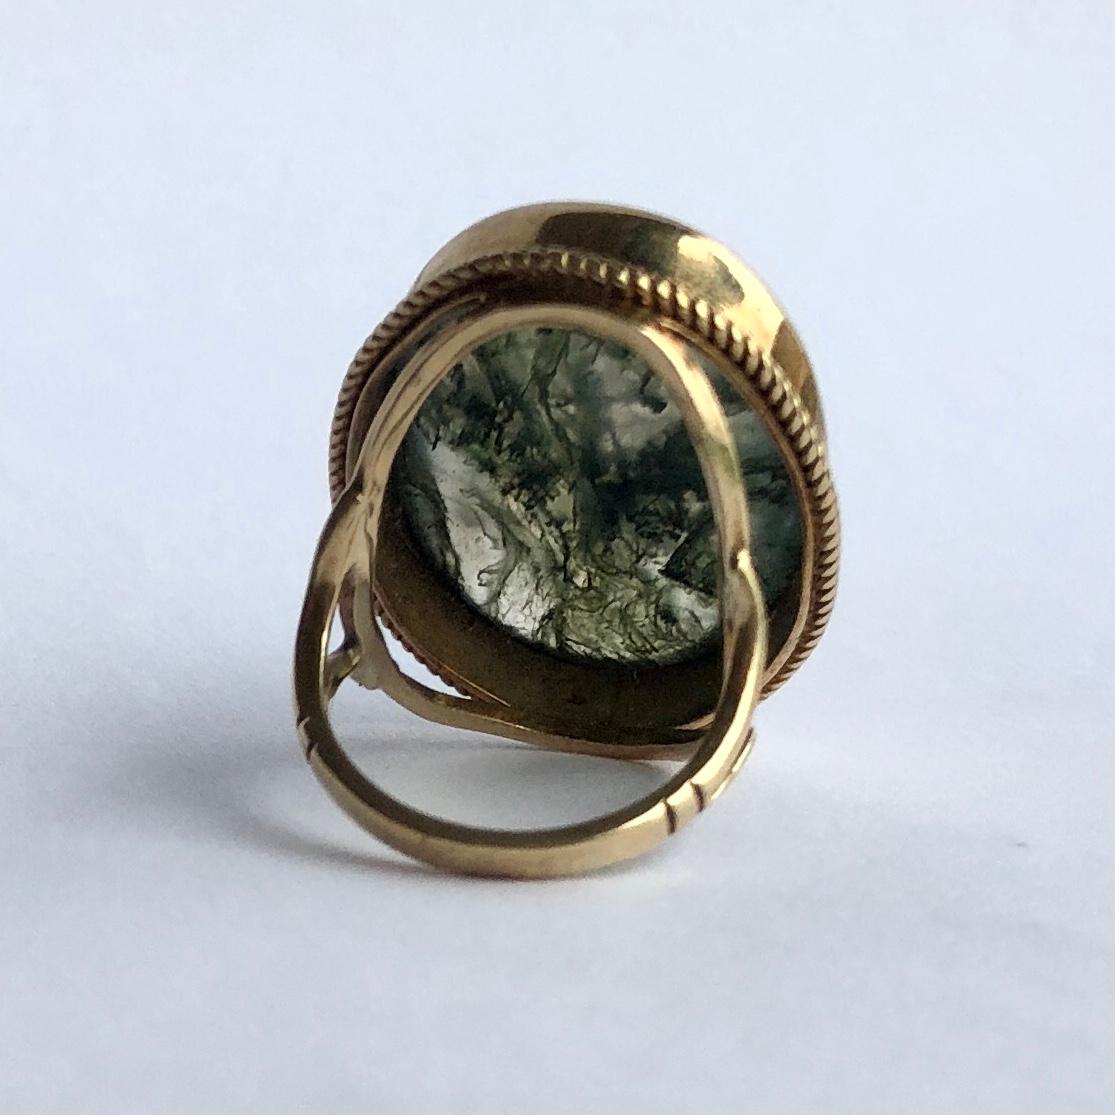 This wonderful moss agate stone has marbling of deep green and amber colour running through. Surrounding the stone there is a rope twist frame and simple setting. 

Size: H 1/2 or 4
Stone Dimensions: 24x17mm 

Weight: 7.55g